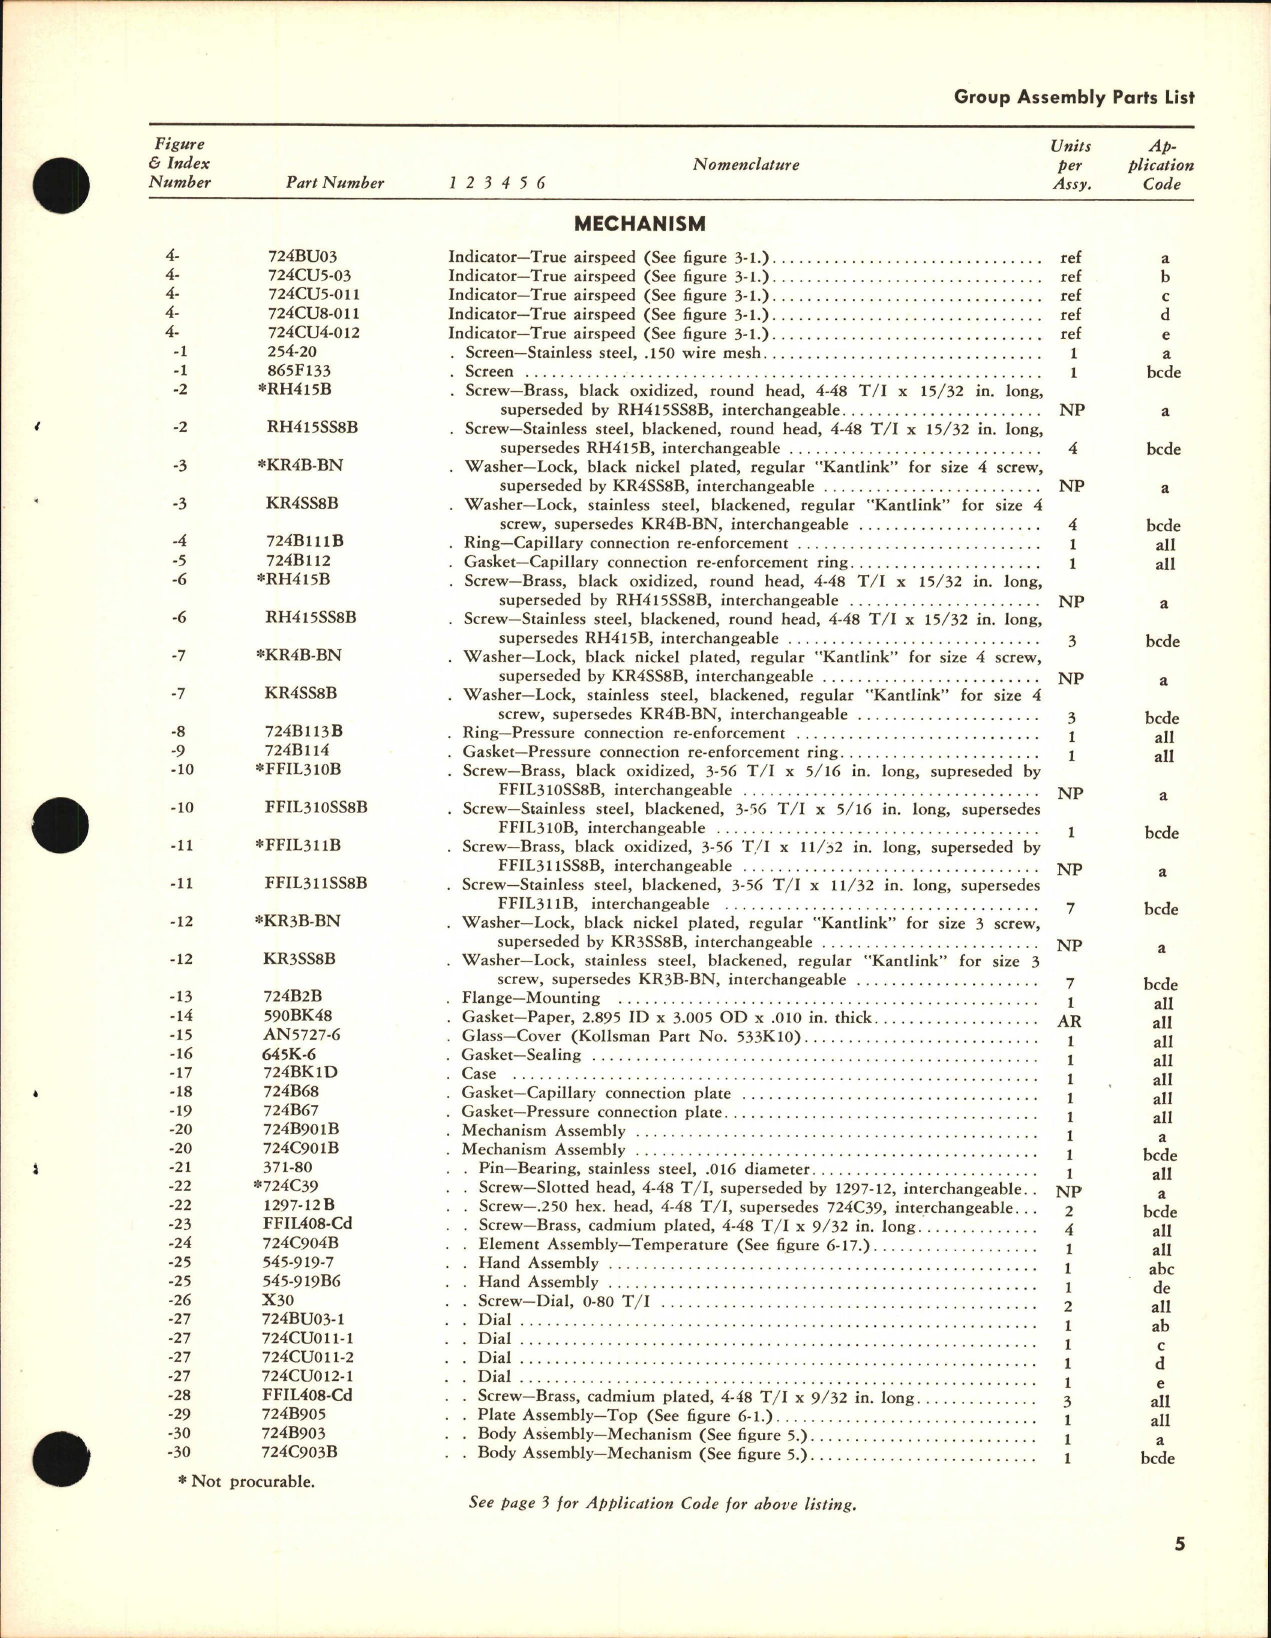 Sample page 5 from AirCorps Library document: Parts Catalog for Kollsman True Air Speed Indicator Type No. 724